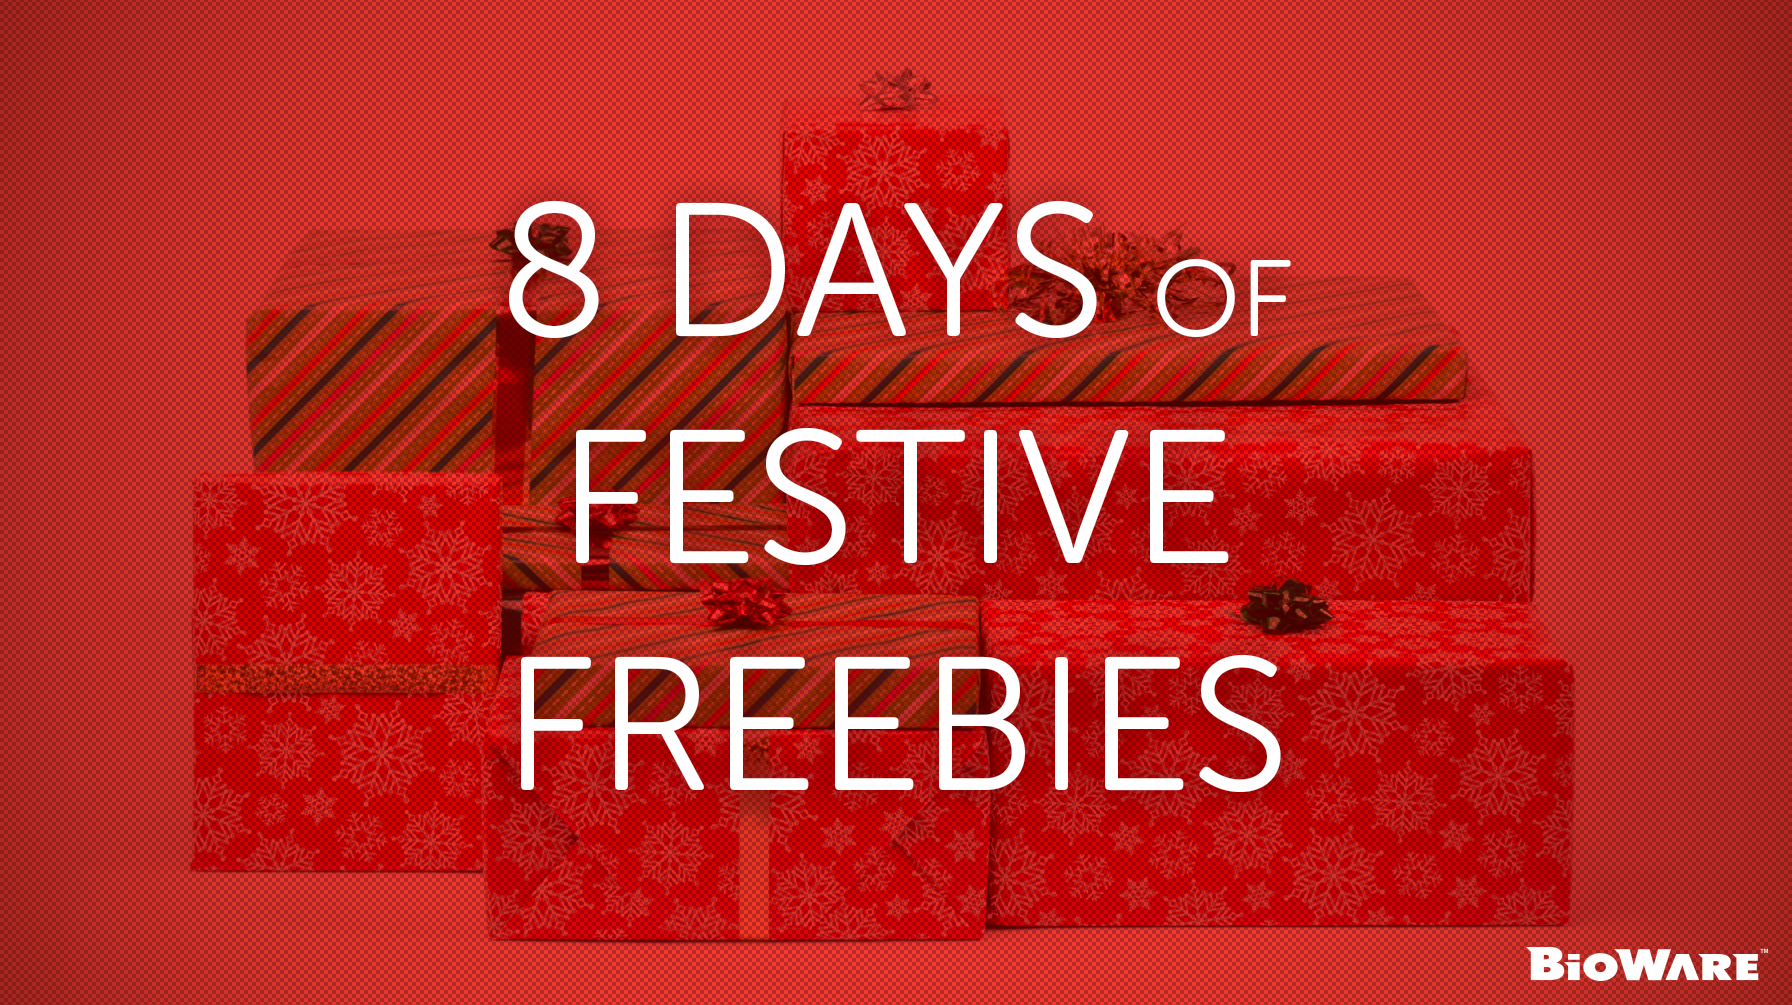 The Eight Days of Festive Freebies